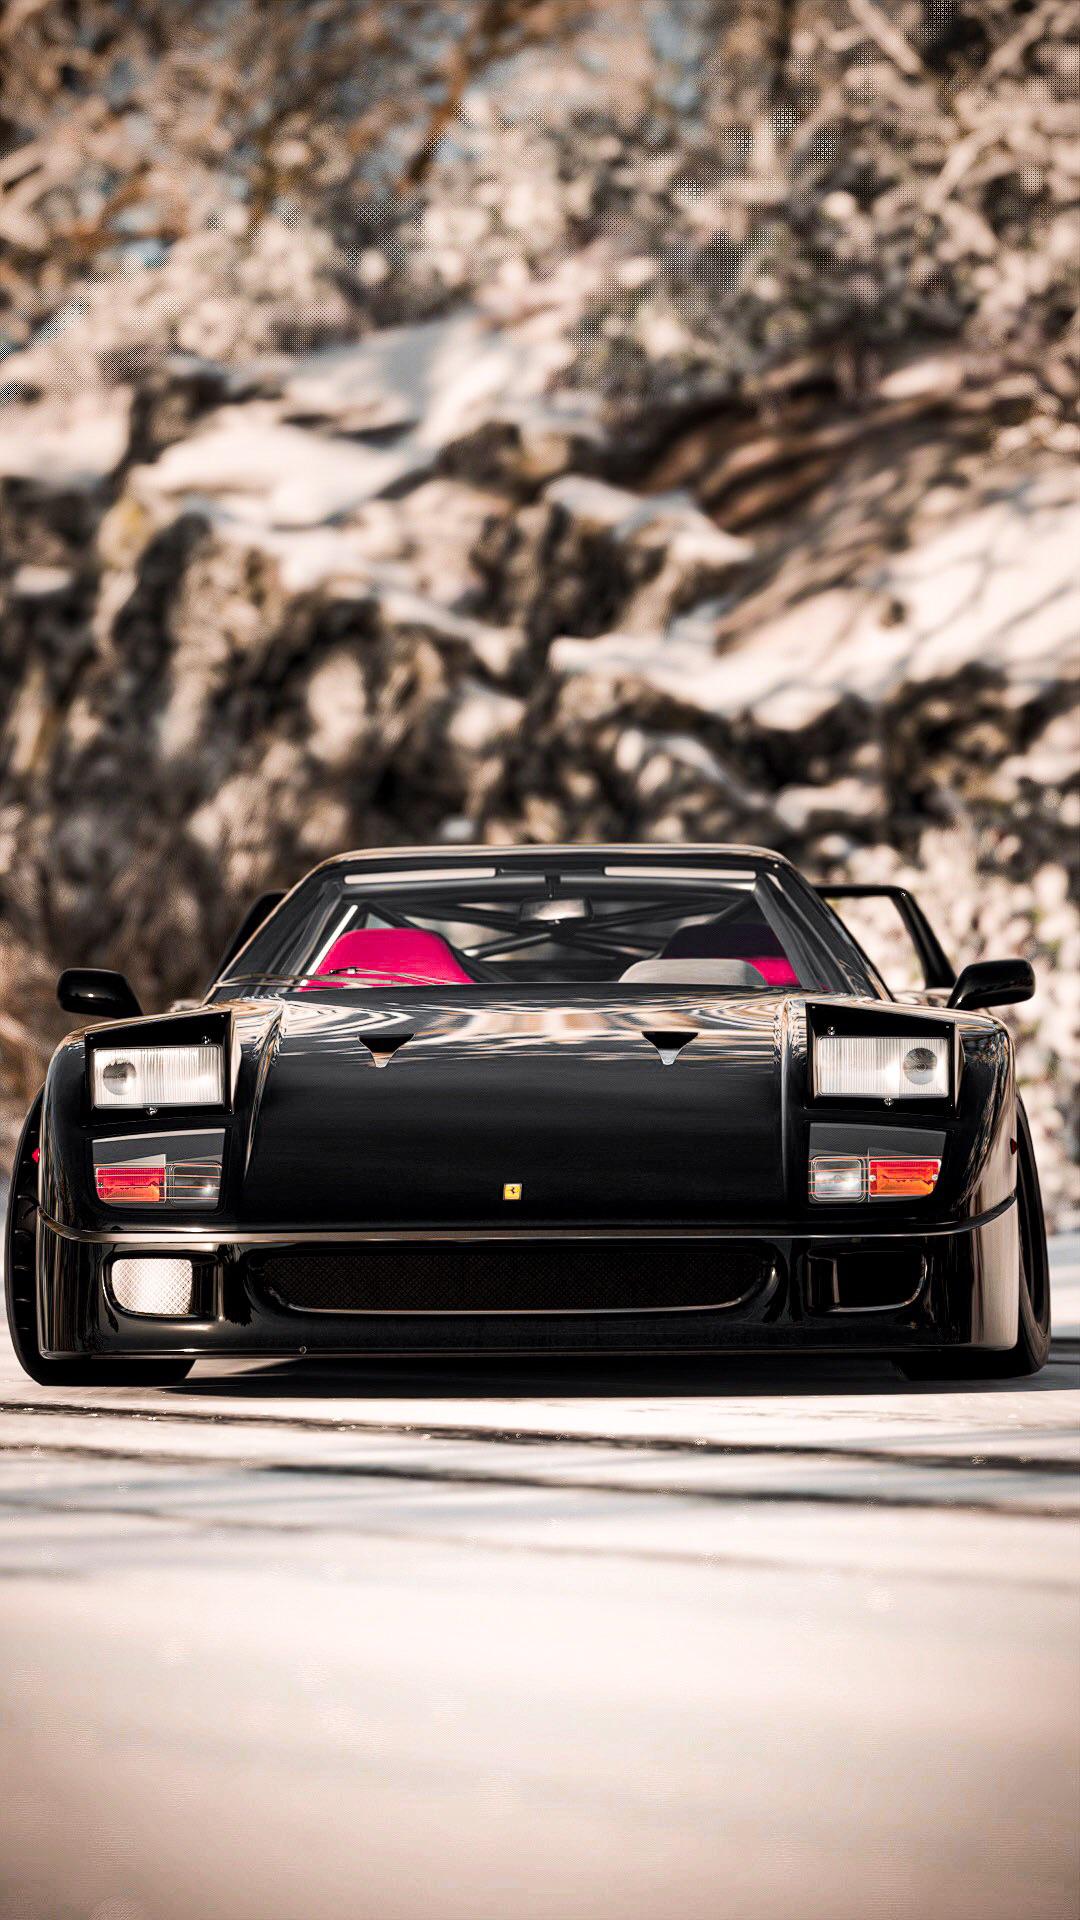 Download These Ferrari iPhone Wallpaper from Forza Now and Thank Us Later